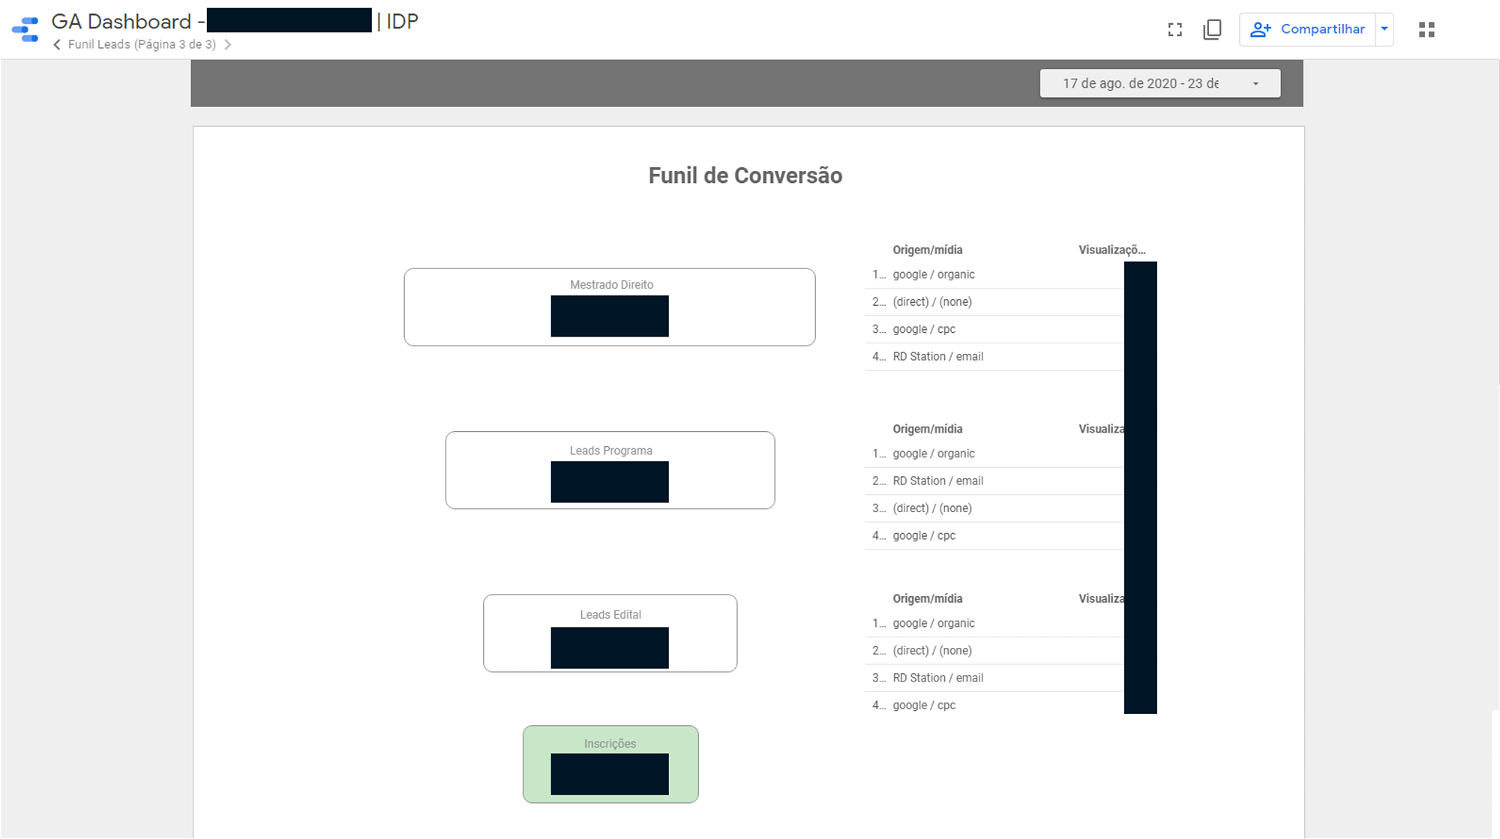 Page 3 of the dashboard showing the conversion funnel and traffic sources of each stage